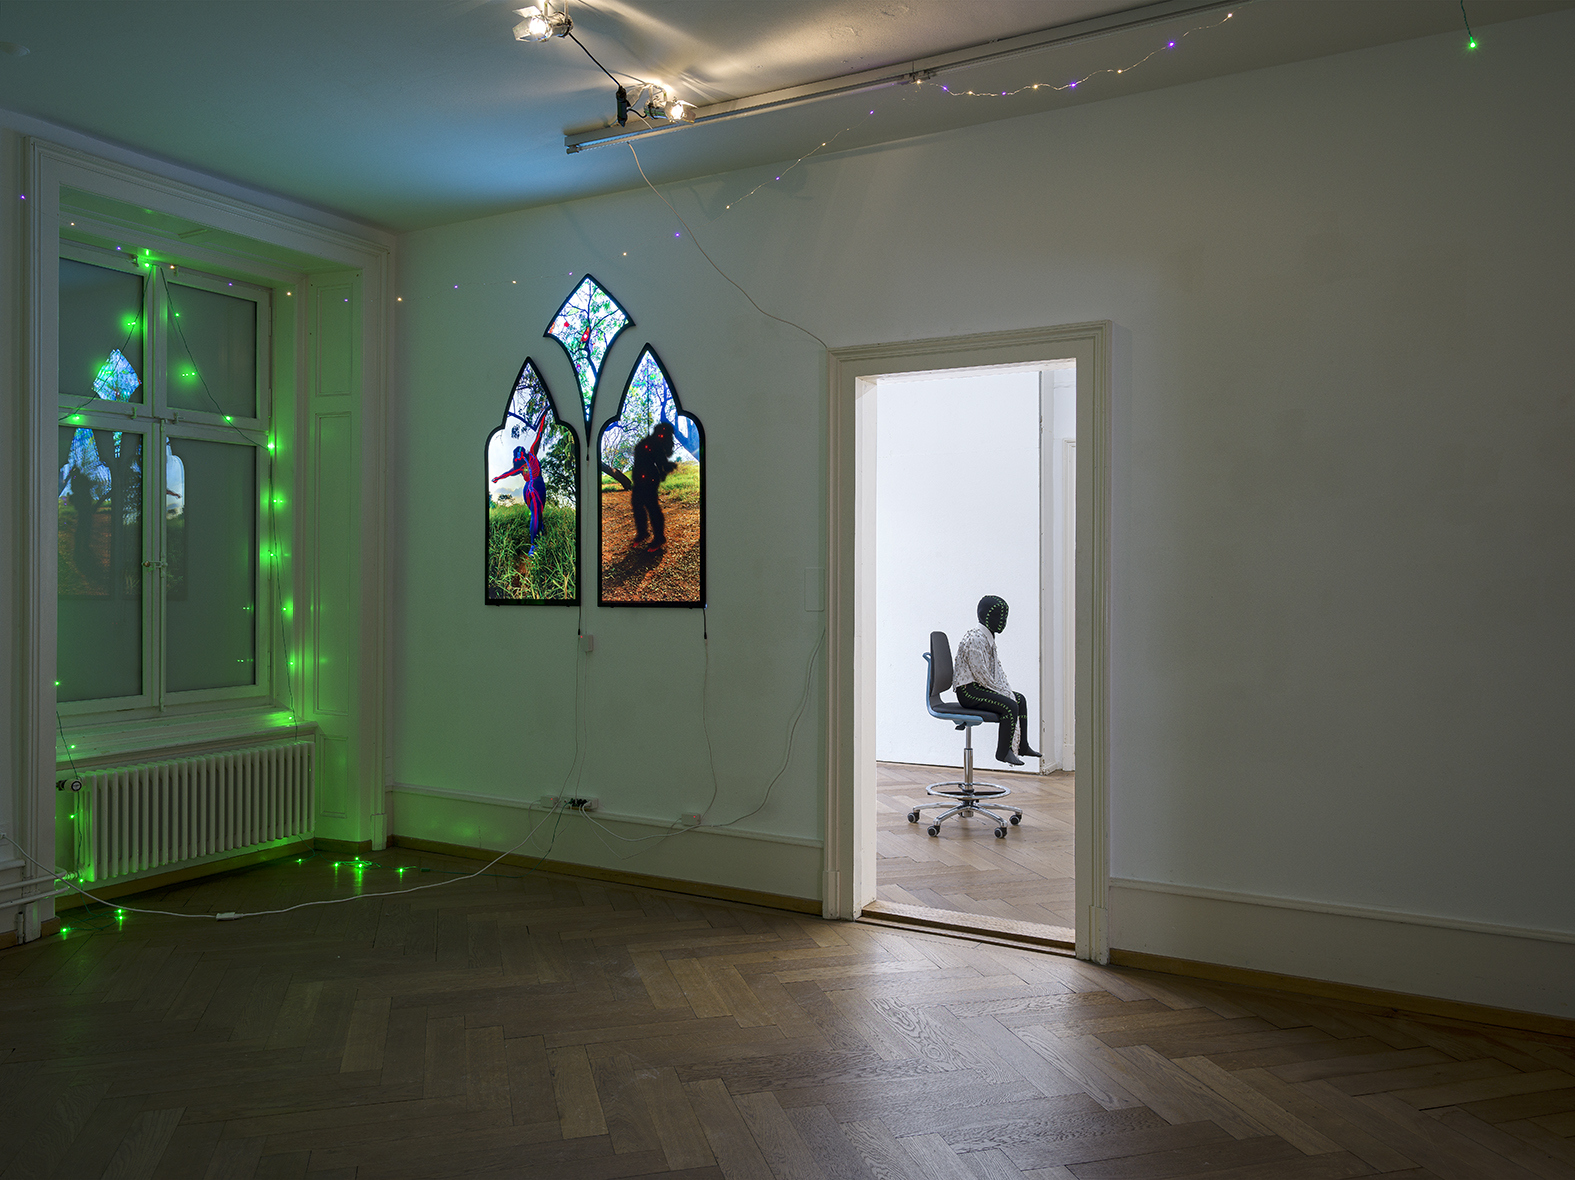 Giulia Essyad, Chapel, 2023 / James Bantone, Child's Play 03, 2022, Exhibition View “Of Bodies in Digital Life”, Kunsthaus Langenthal, 2024. Photo: Cedric Mussano, Courtesy of the artist / Karma International, Zurich.